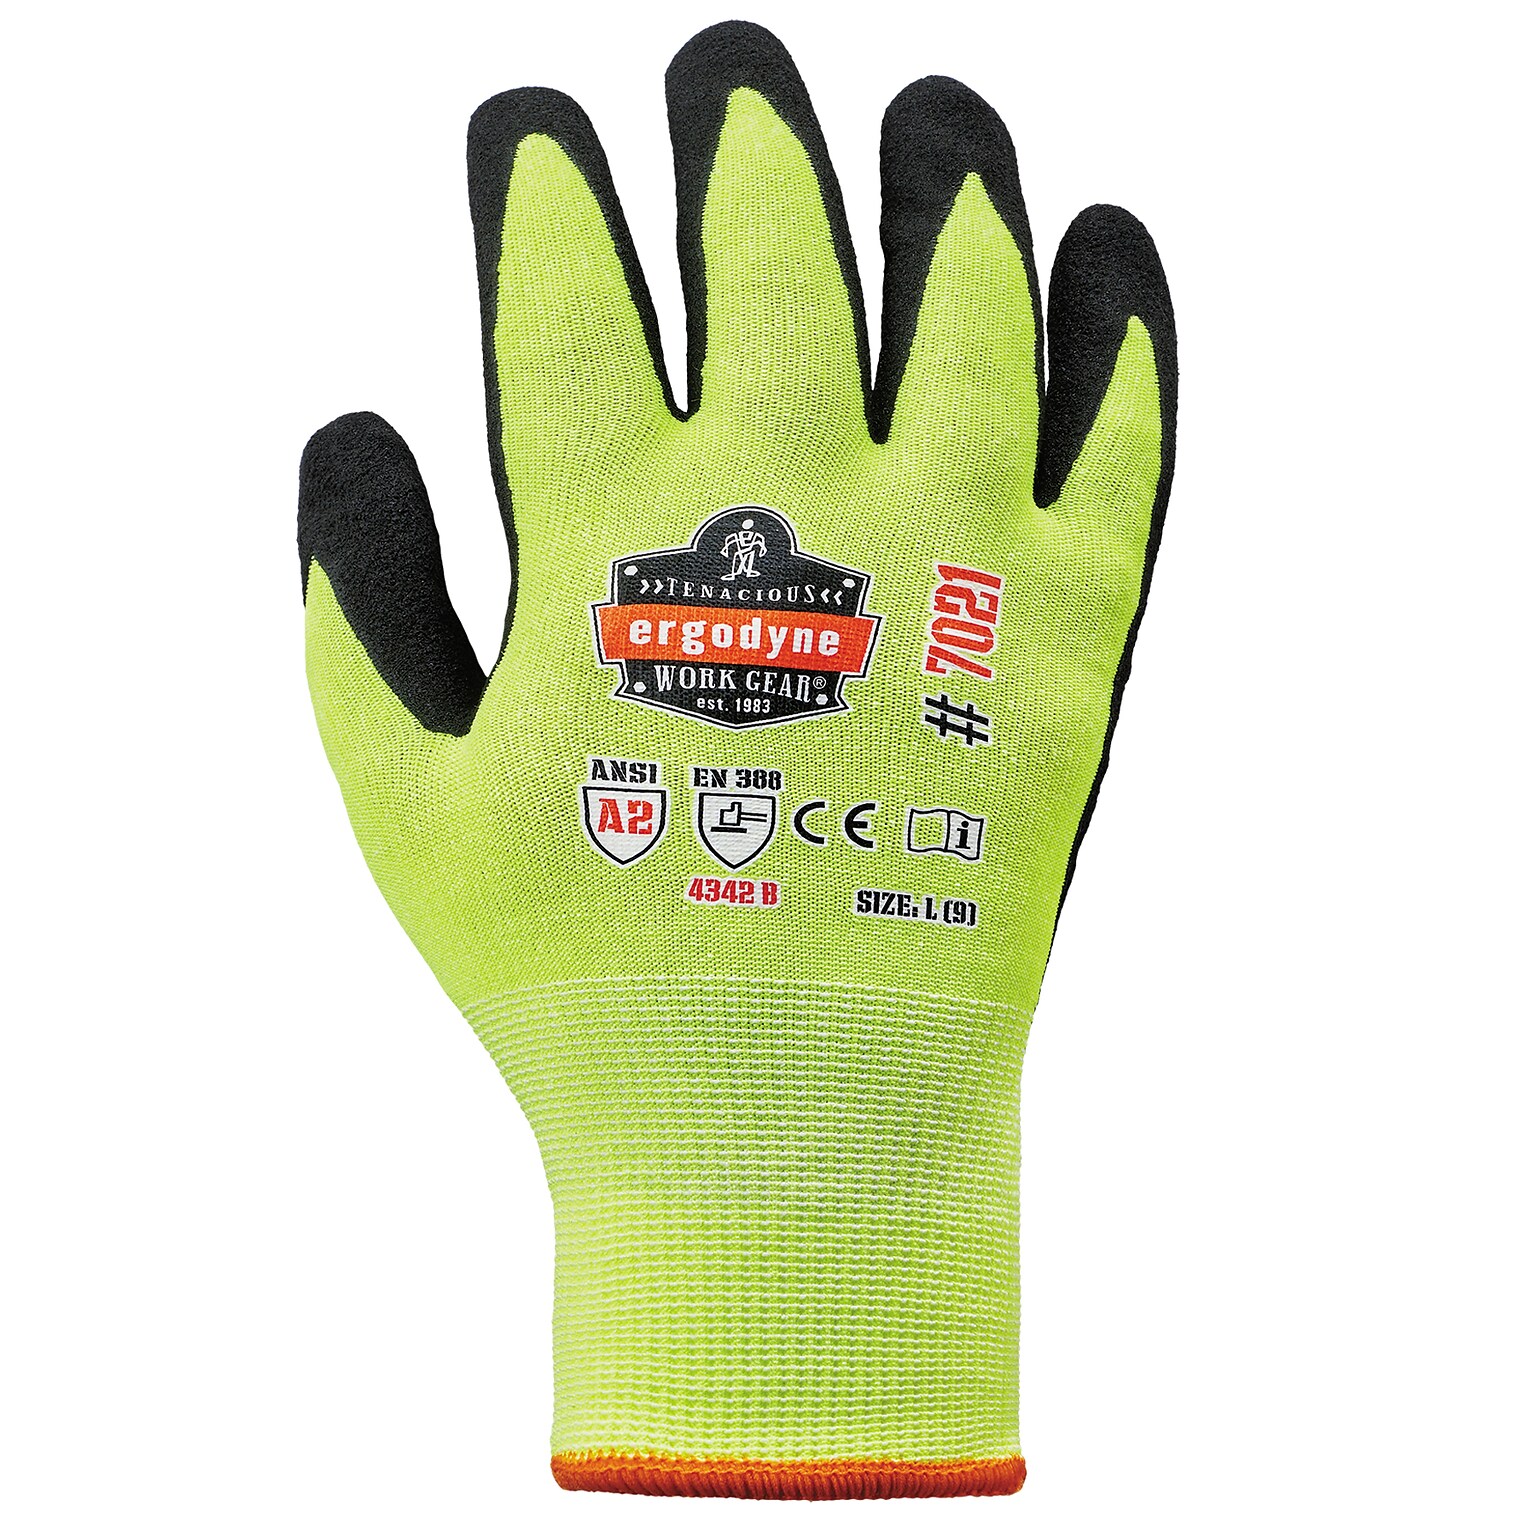 Ergodyne ProFlex 7021 Hi-Vis Nitrile Coated Cut-Resistant Gloves, ANSI A2, Wet Grip, Lime, Small, 144 Pairs (17962)